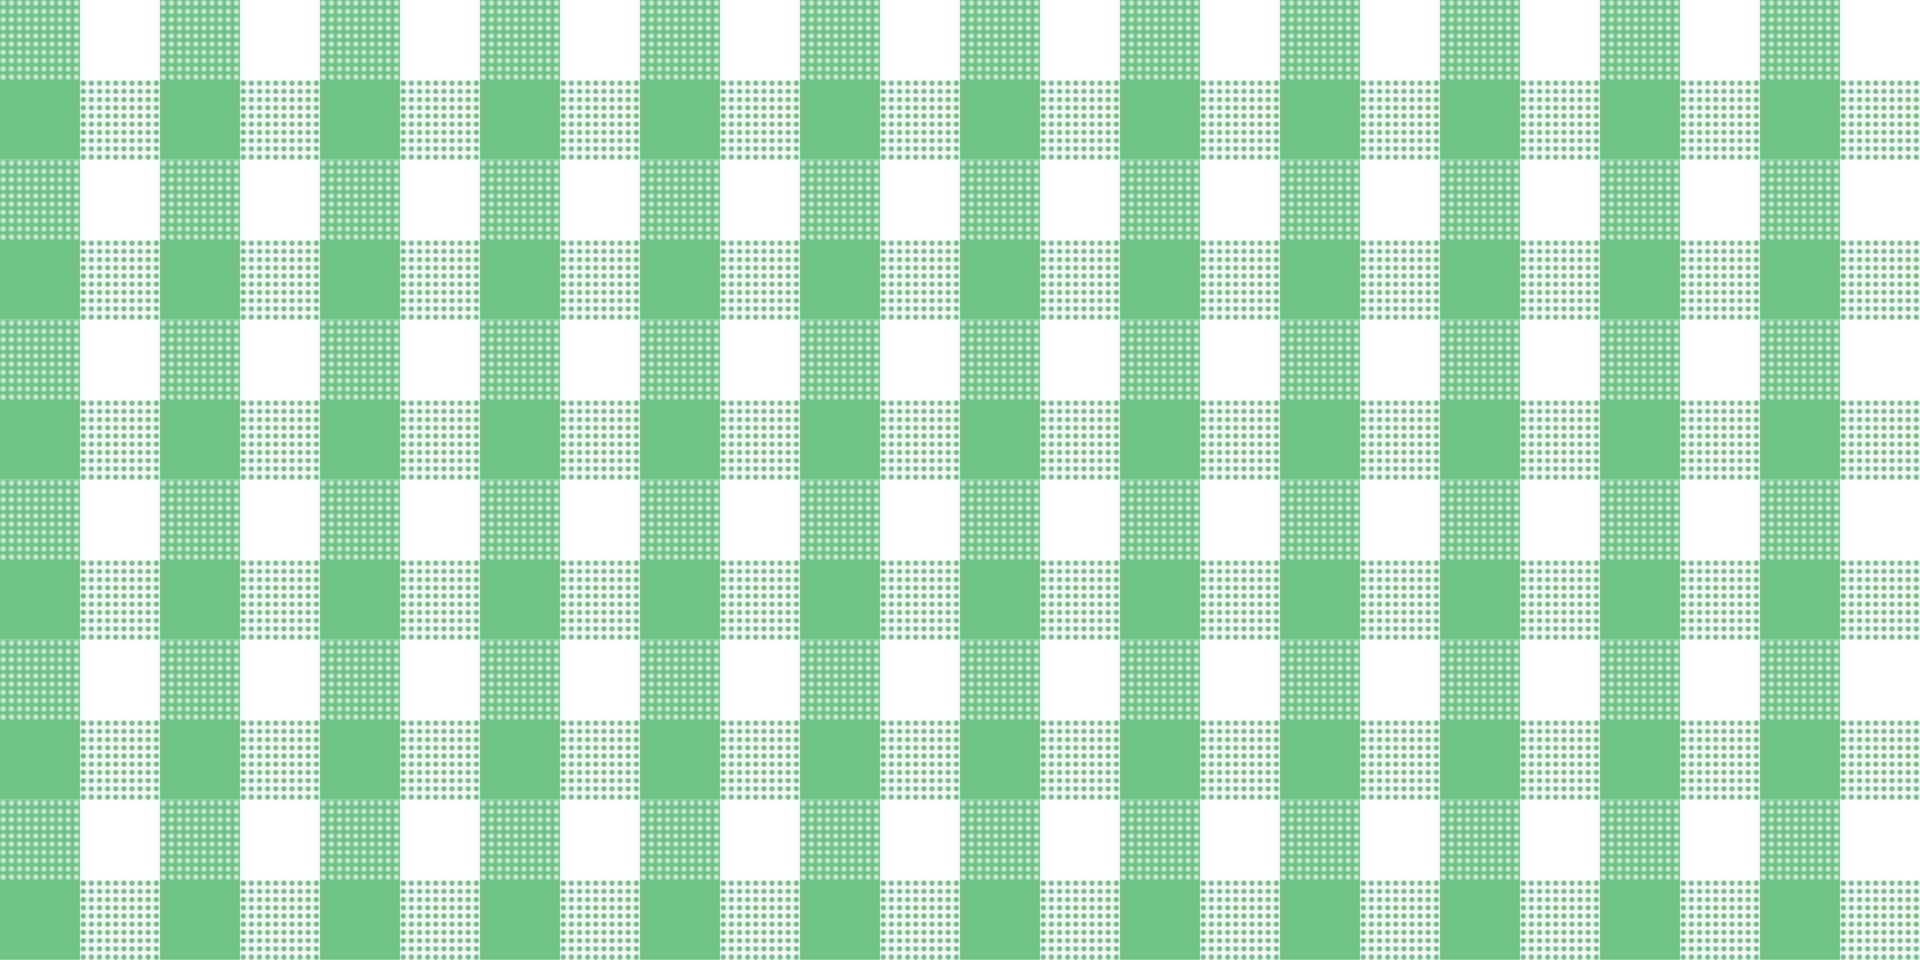 New fabric textile cloth gingham tartan tablecloth checker abstract background texture square wallpaper decoration pattern seamless vector illustration